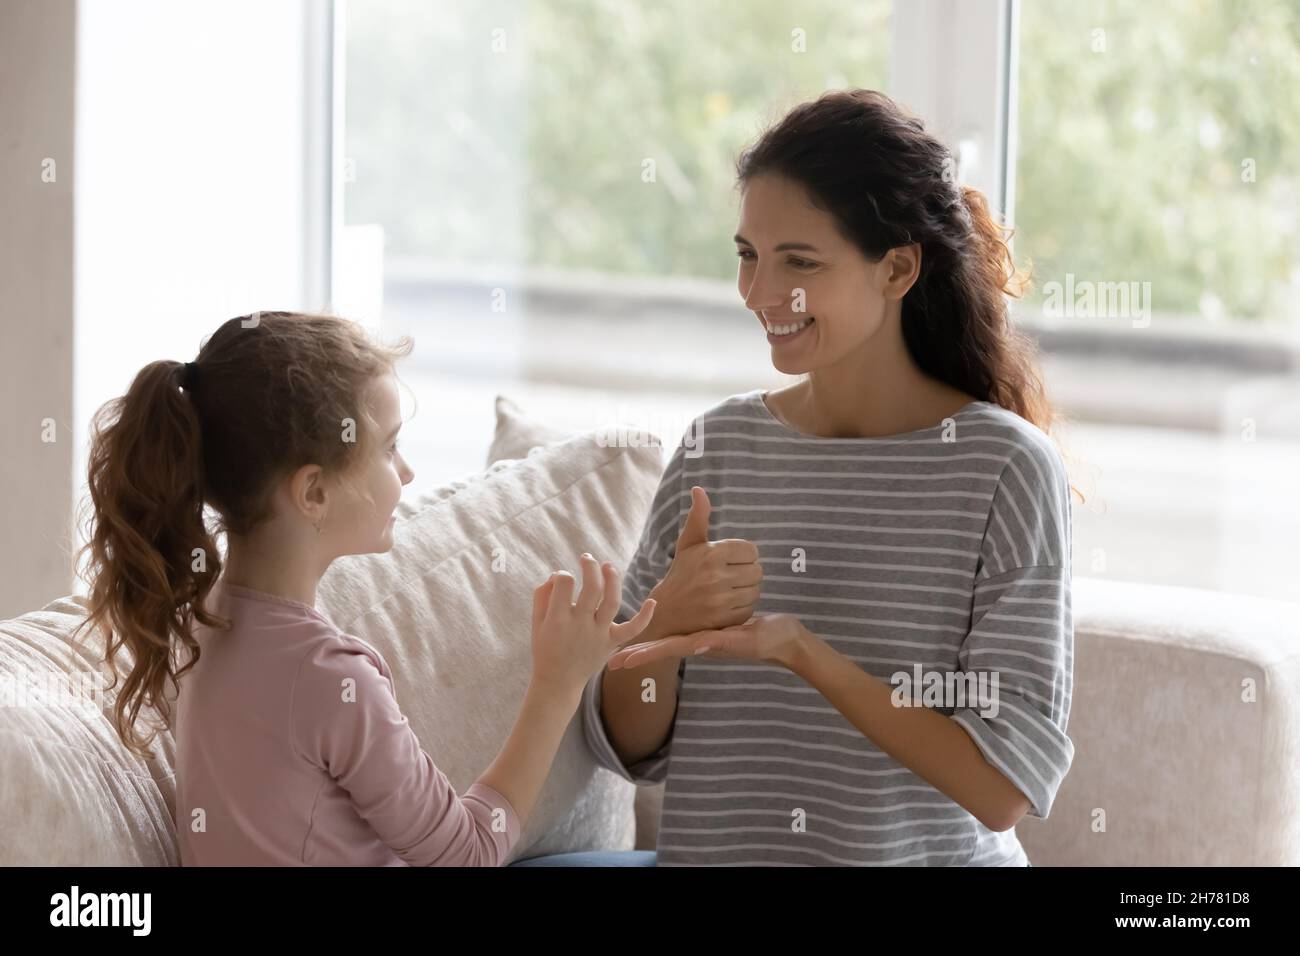 Smiling caring mother teaching disabled daughter, learning sign gesture Stock Photo